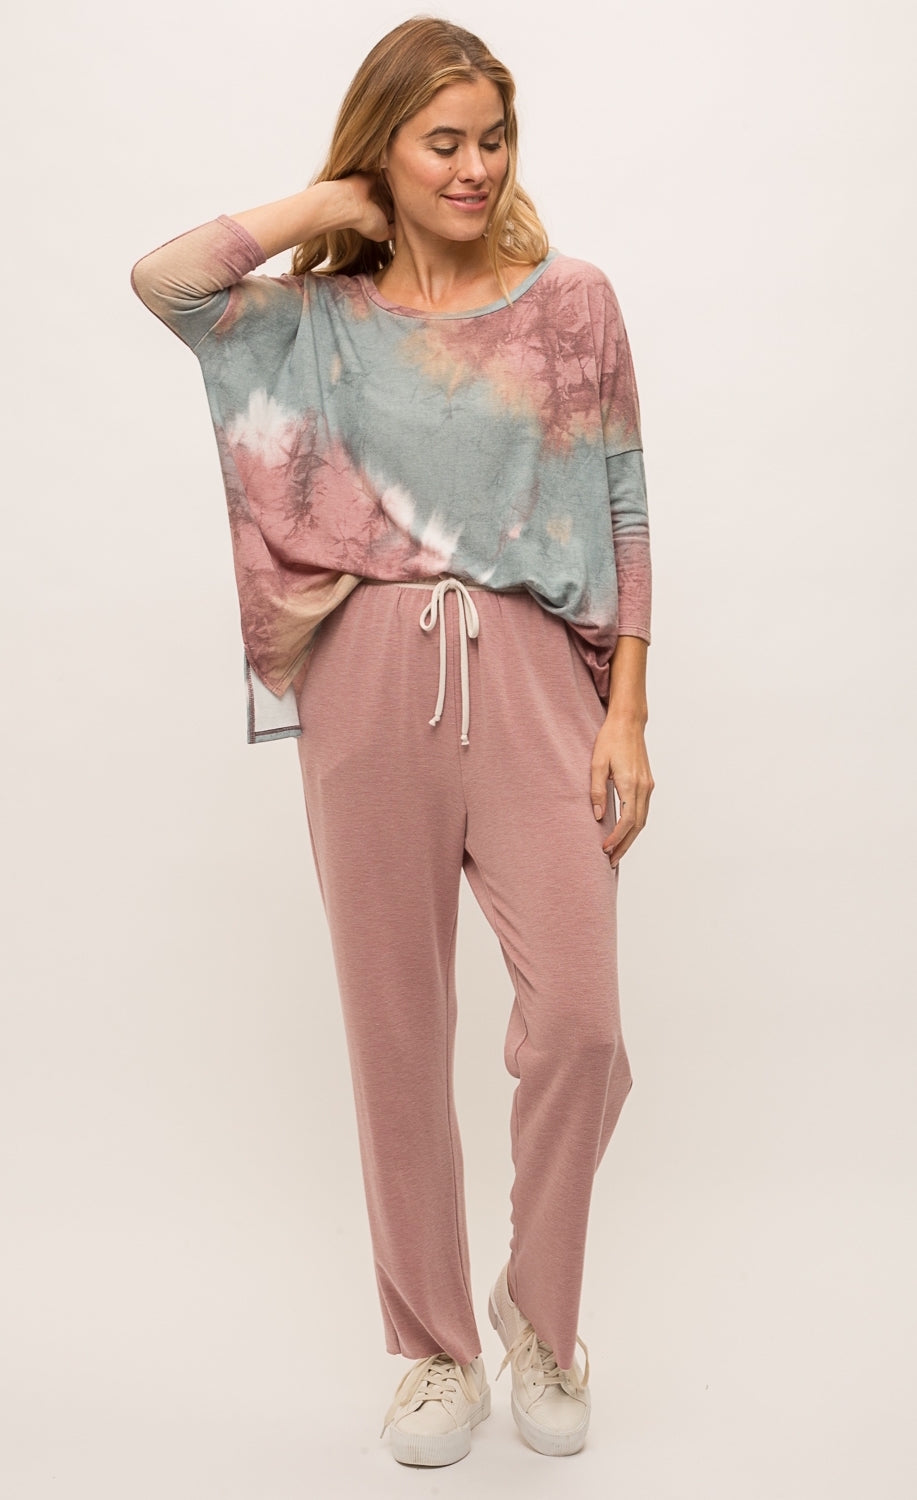 Front full body view of a woman wearing the mystree vintage tie dye top and the mystree lounge pant. The top is pink and blue tie dye and has long drop shoulder sleeves and a boxy fit. The bottoms are burgundy pink with a relaxed fit, pockets, and a white waistband.